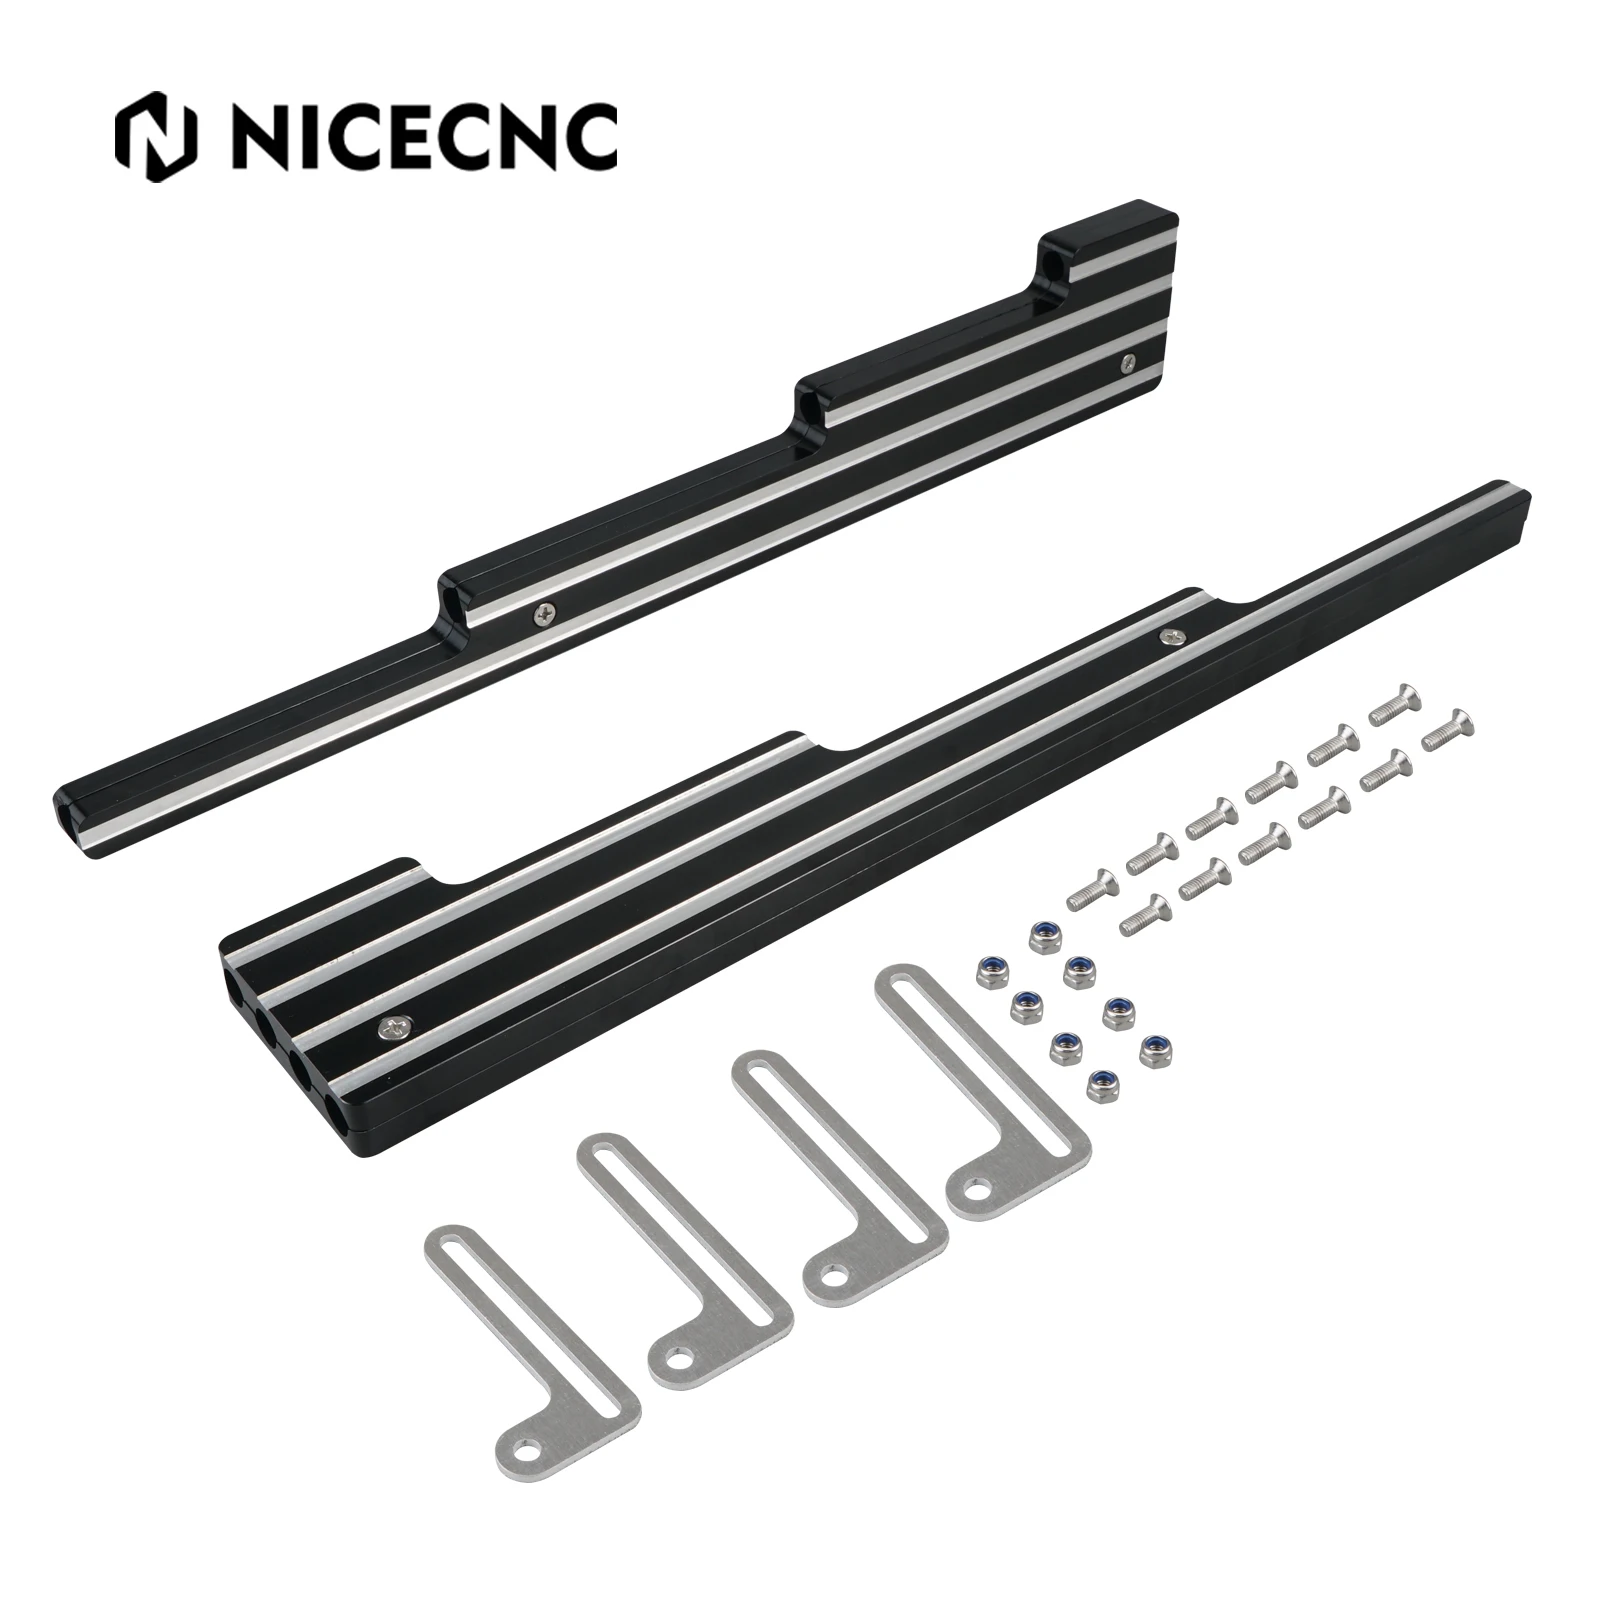 

NICECNC Spark Plug Wire Looms Holders for Chevy Small Block SBC BBC 350 Aluminum Retro Fin Spark Plug Wire Looms Accessories